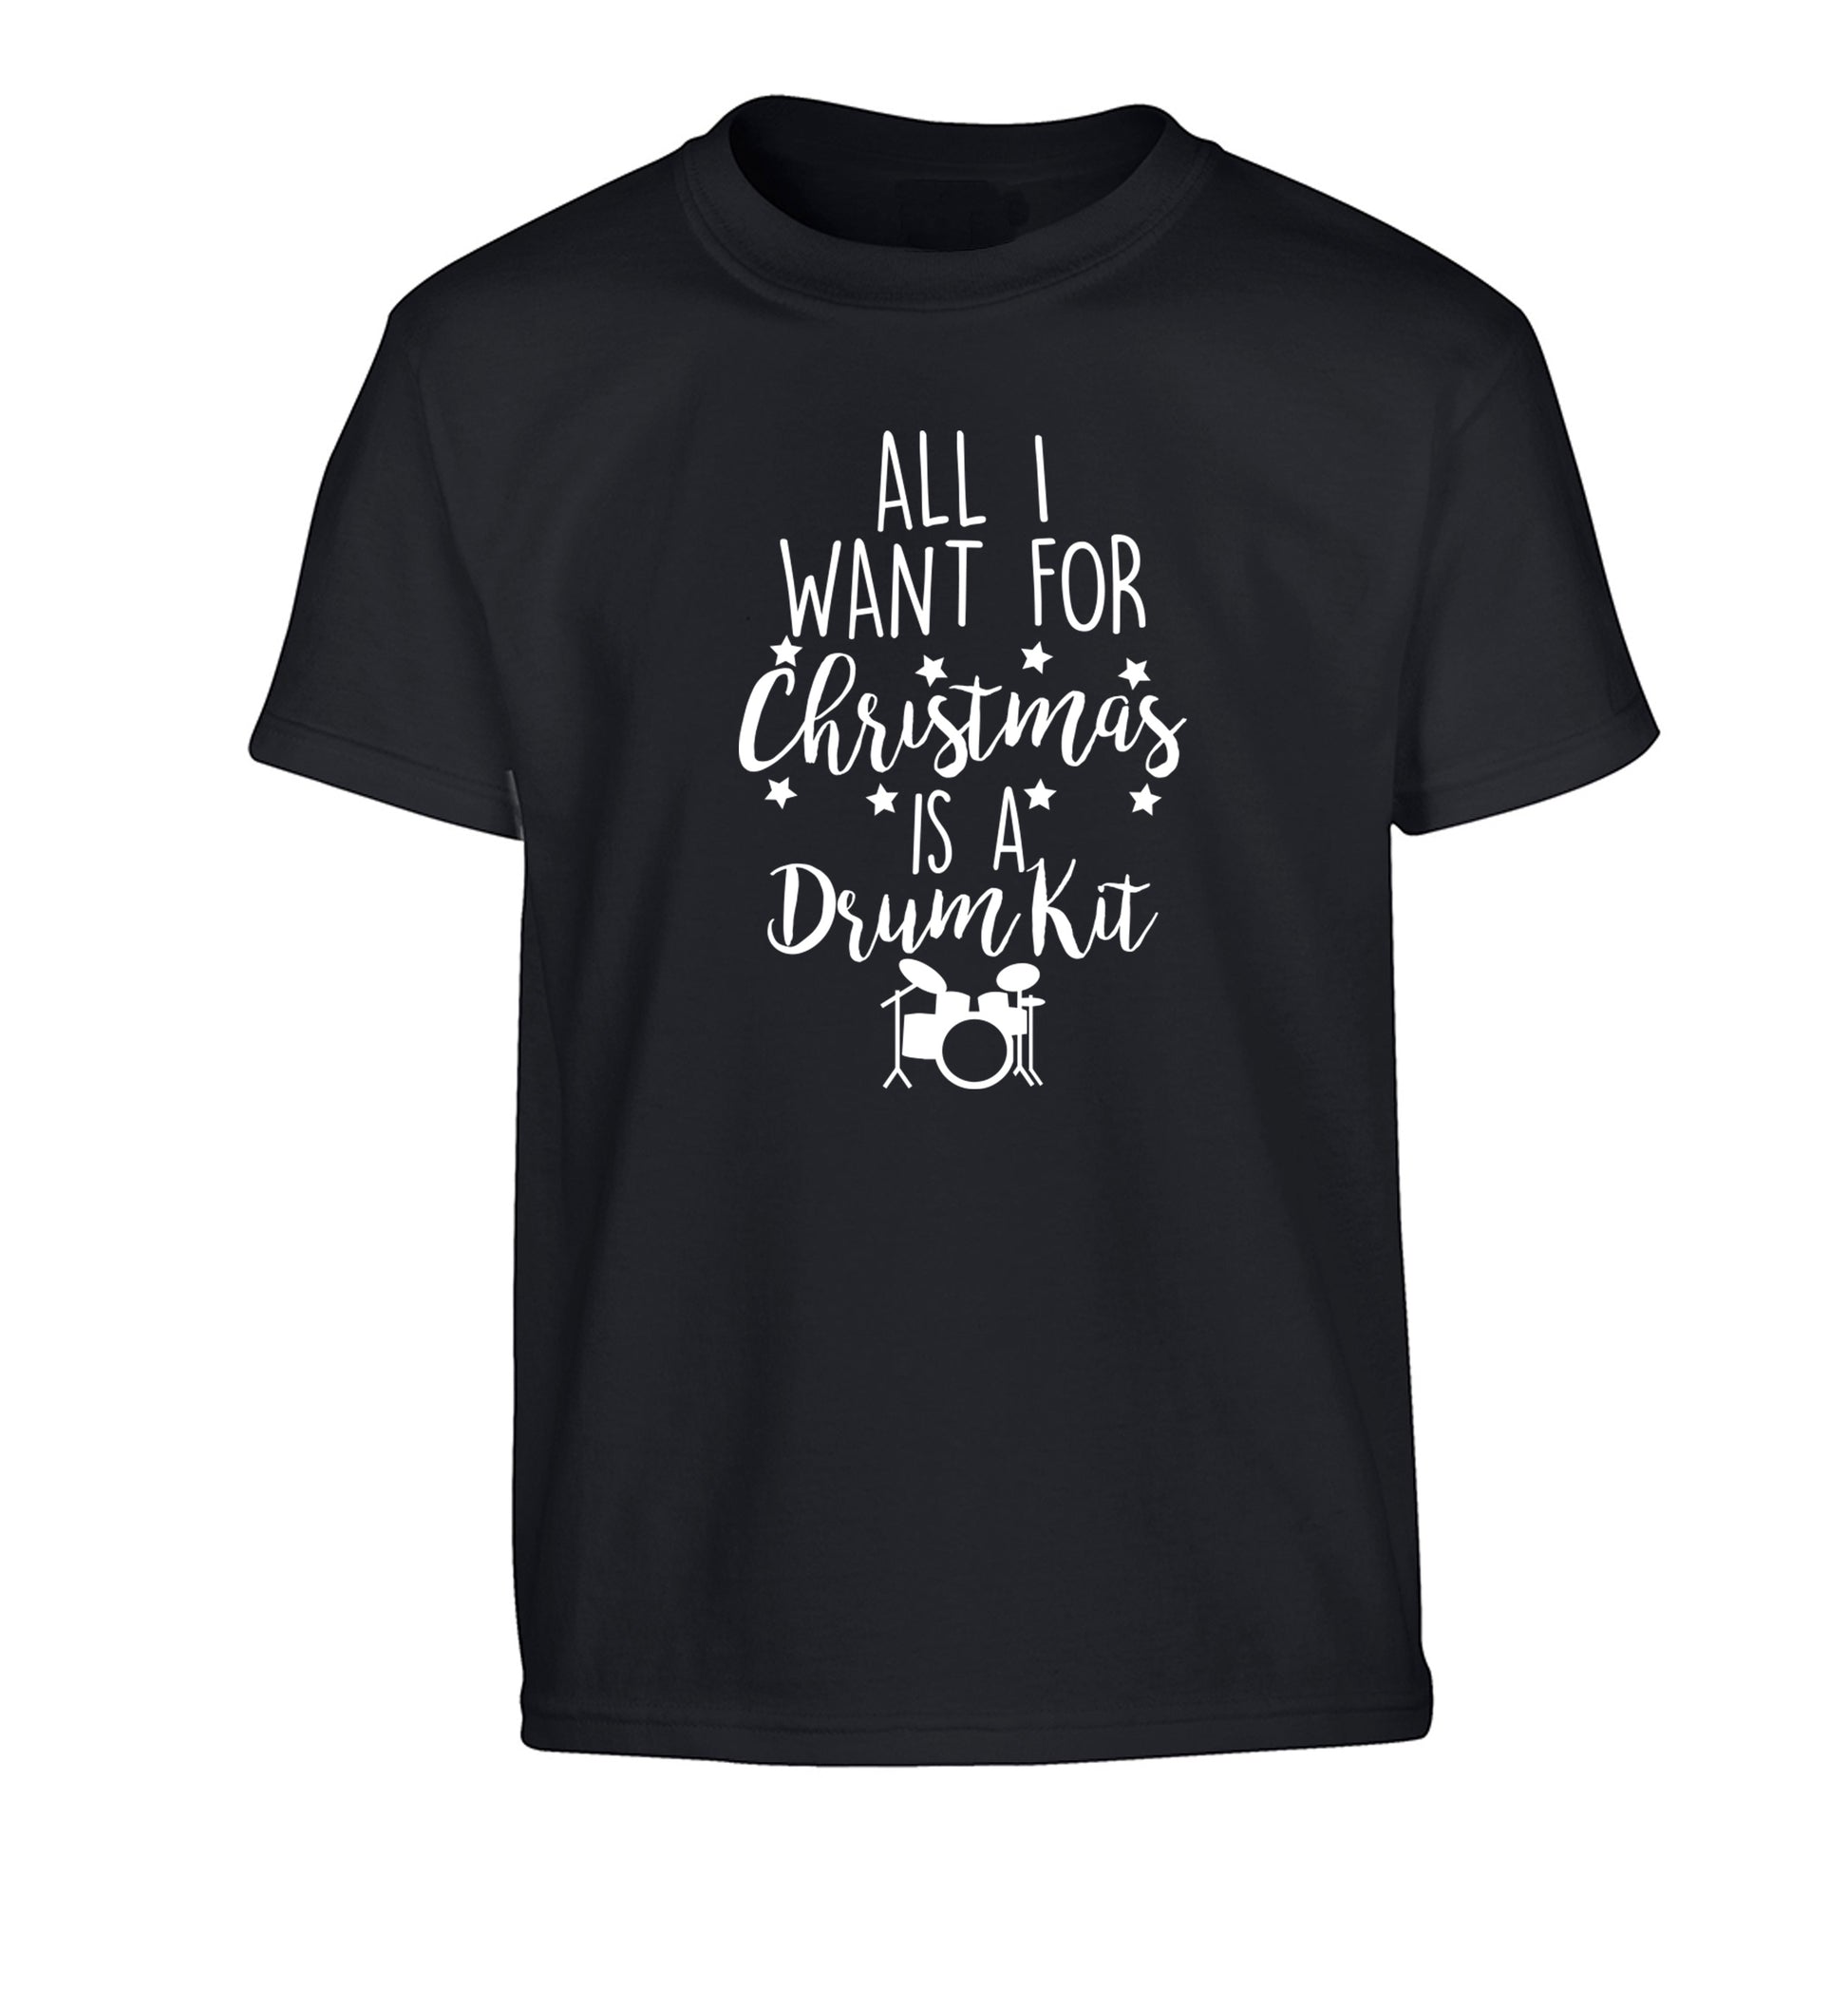 All I want for Christmas is a drum kit! Children's black Tshirt 12-14 Years